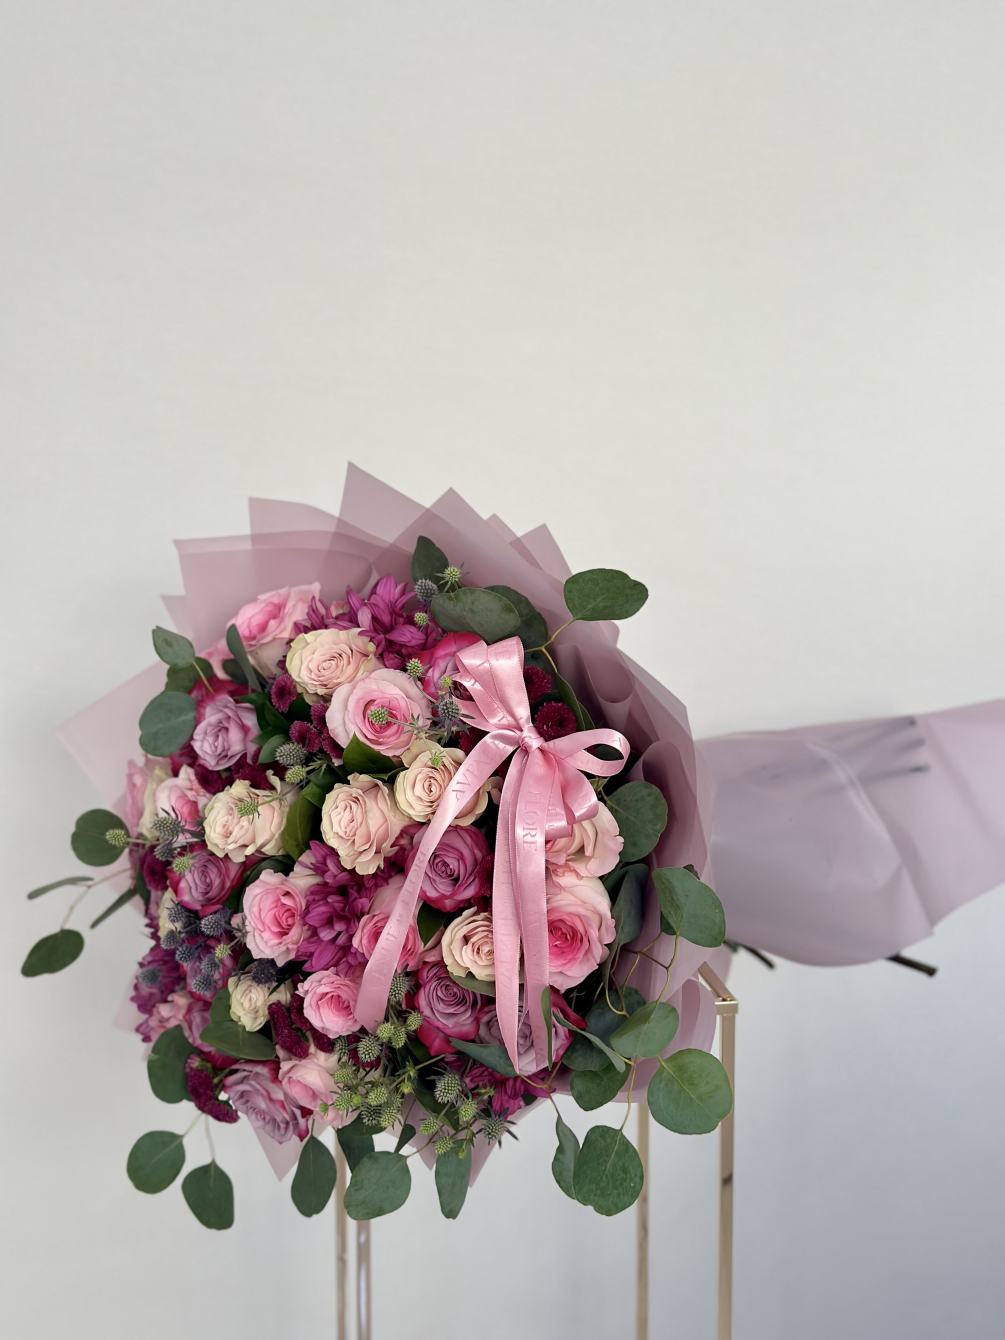 This exquisite bouquet captures the essence of romance and elegance with a